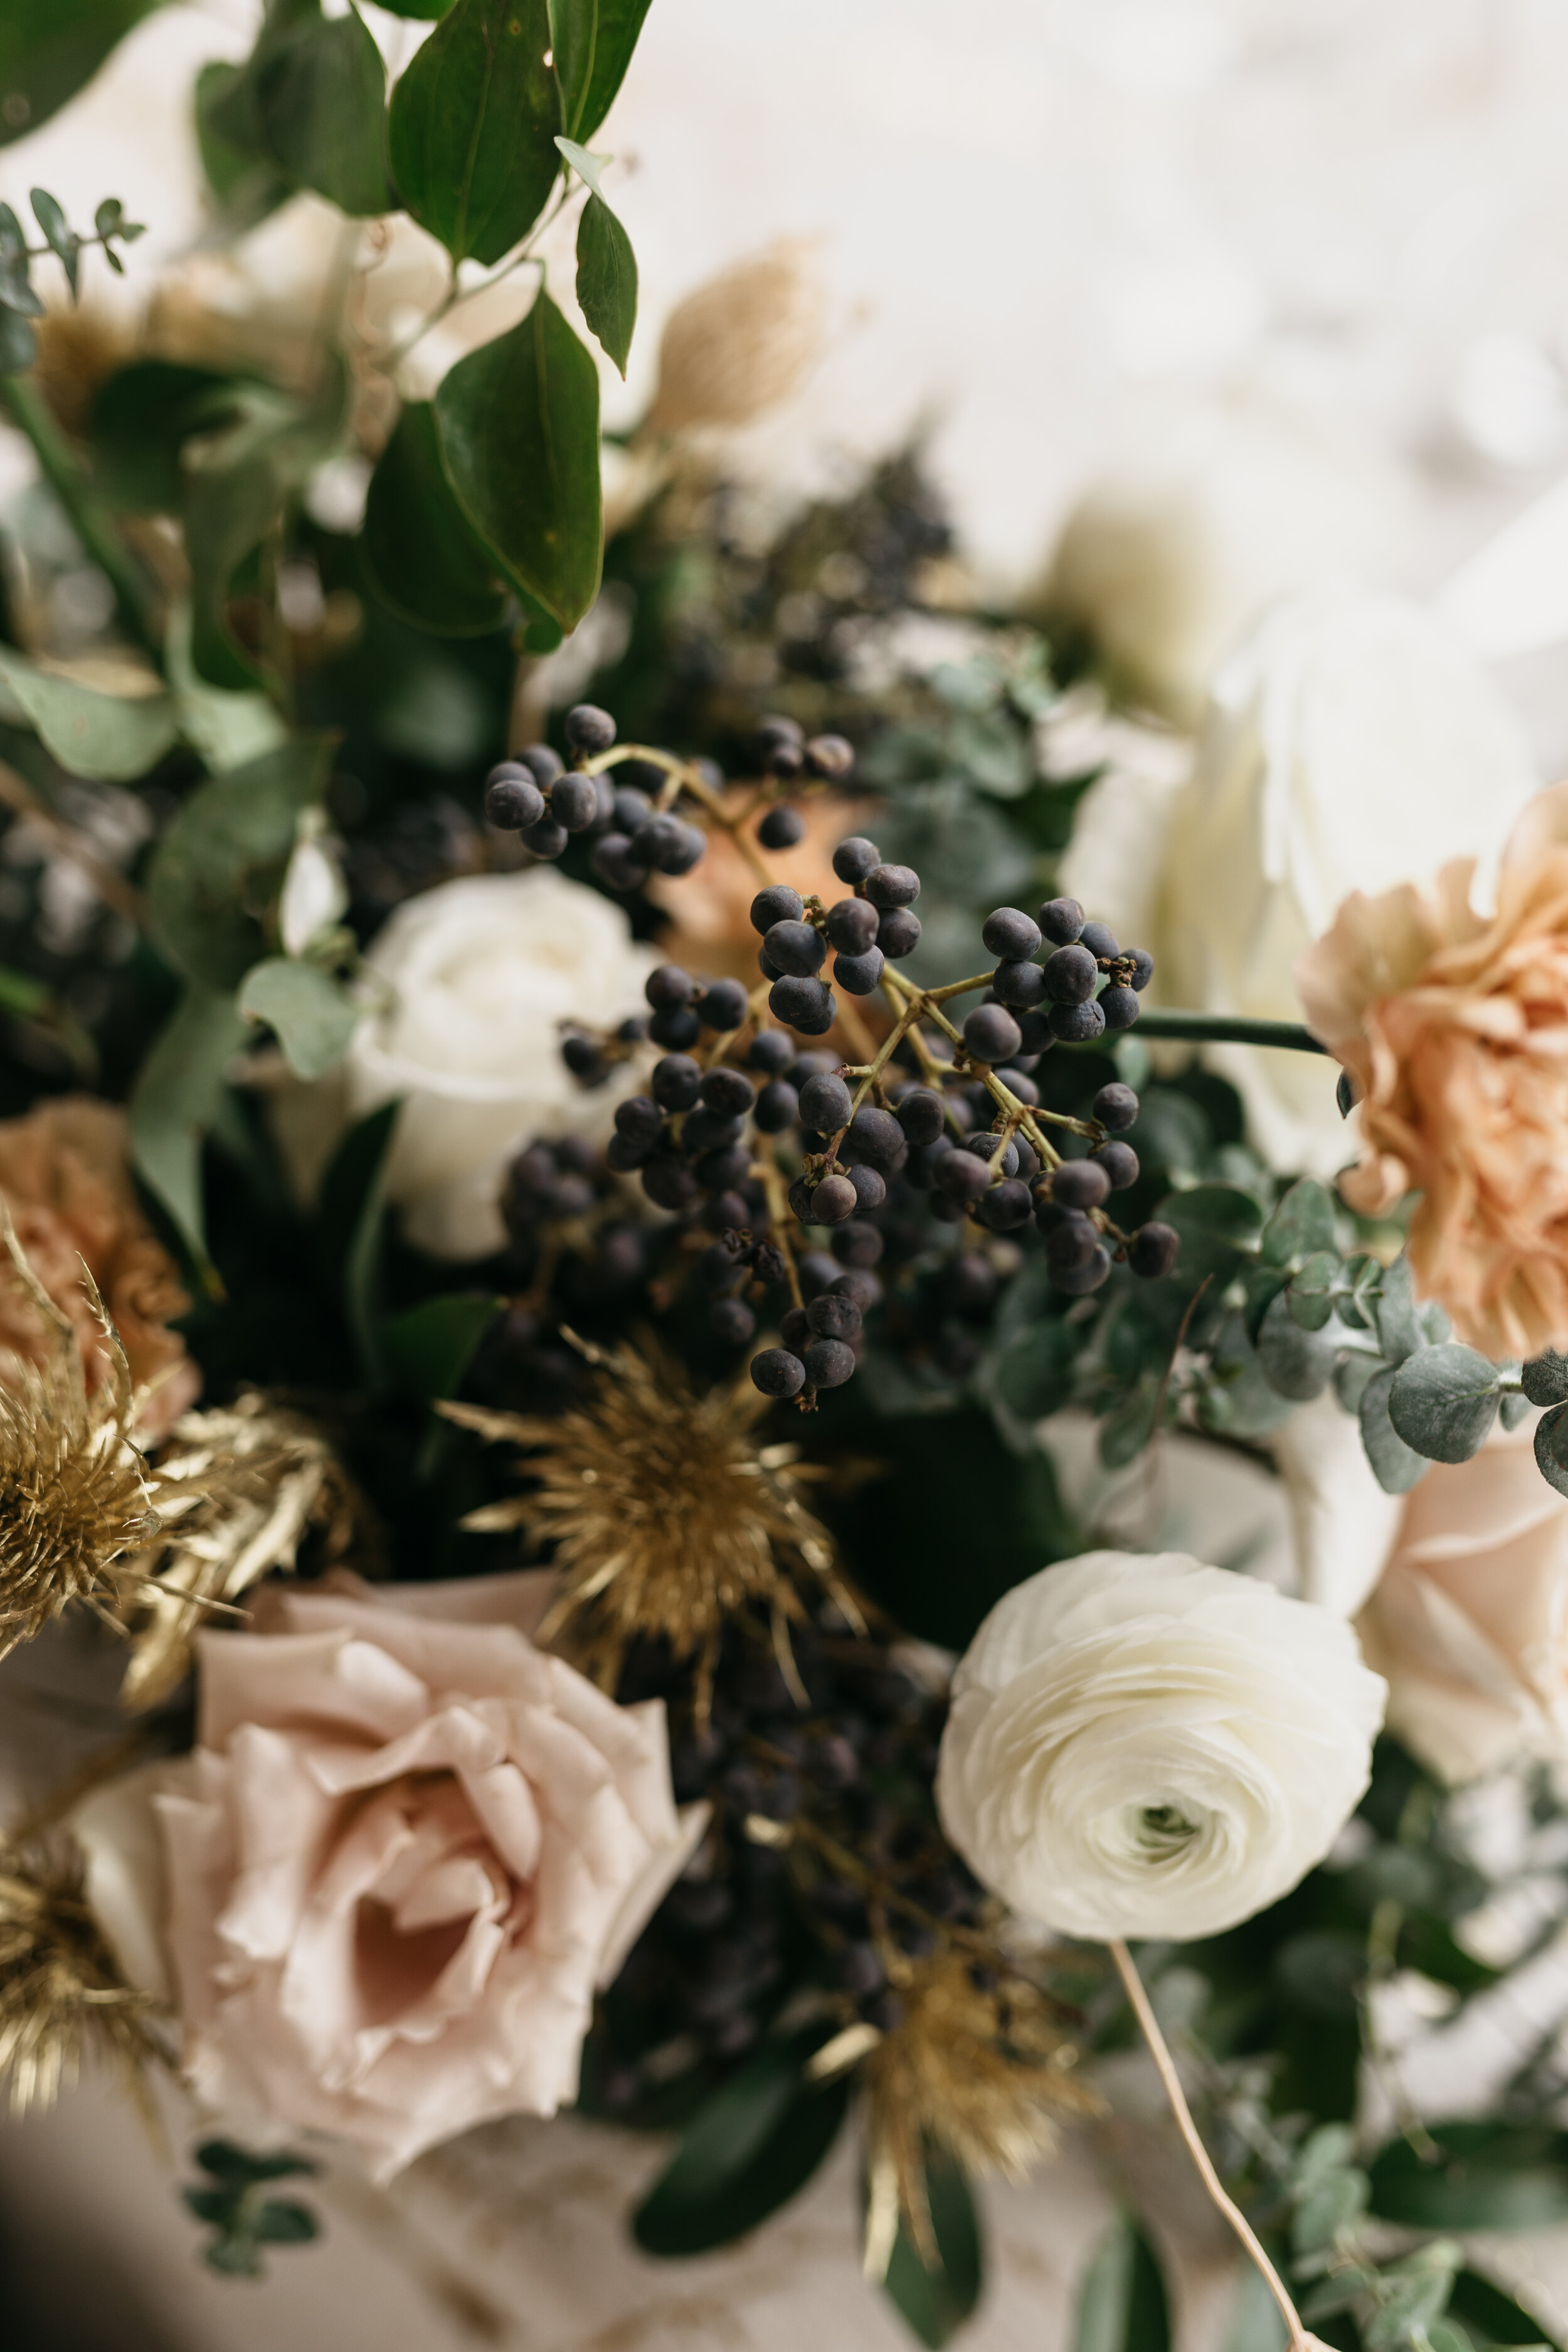 Winter inspiration centerpiece featuring white roses, berries, touches of gold, baby eucalyptus, and lush greenery. Nashville wedding florist Rosemary & Finch at OZARI.